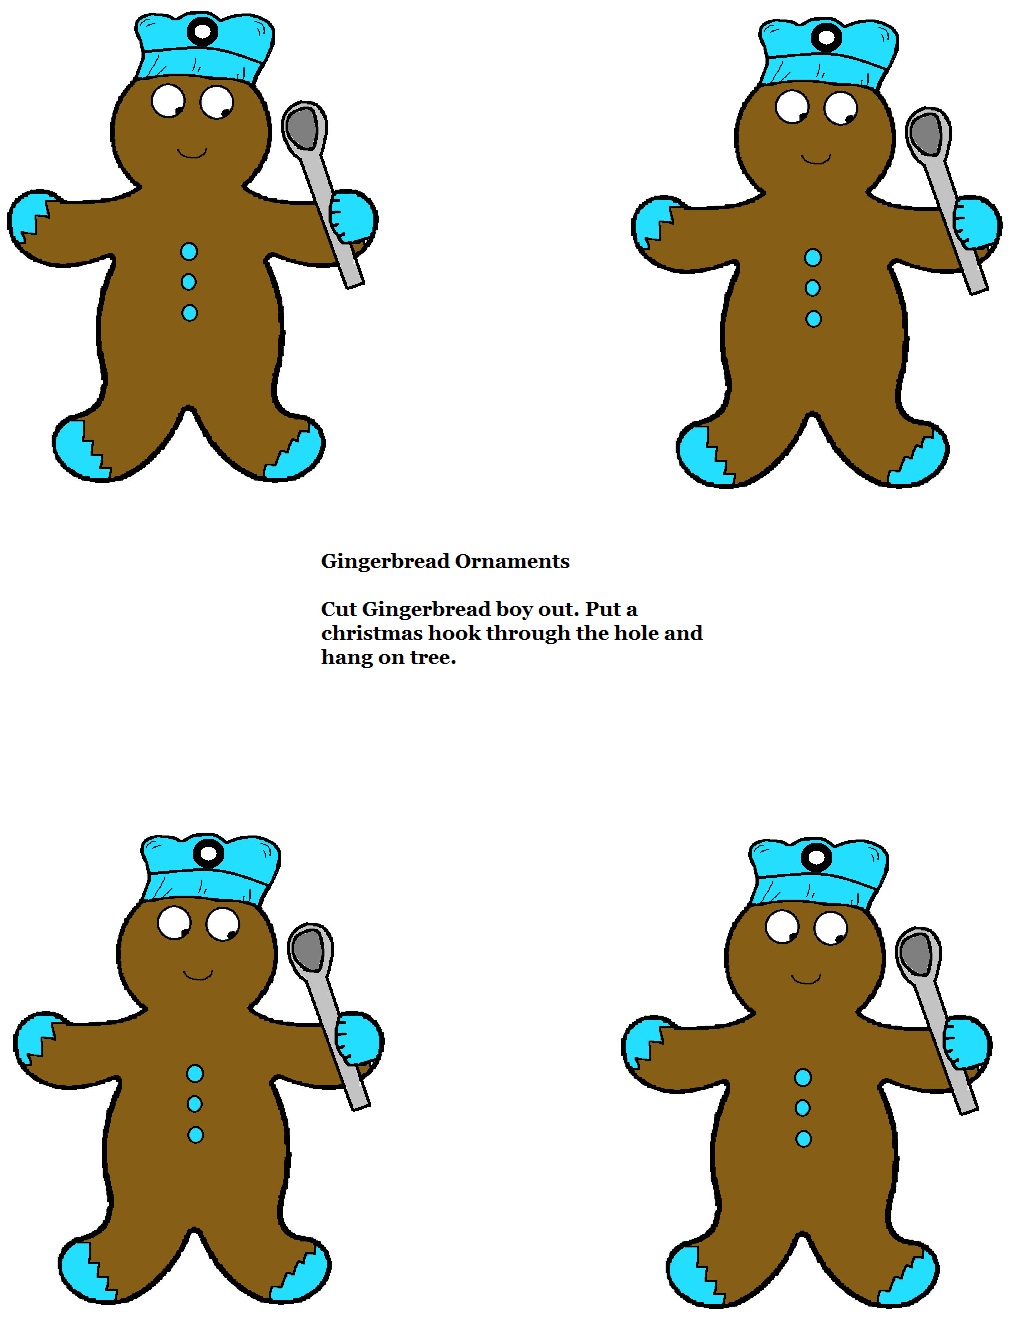 Free Printable Cutout Template Gingerbread Christmas Ornaments For Kids To Do in Sunday School or Children's Church Class by Church House Collection